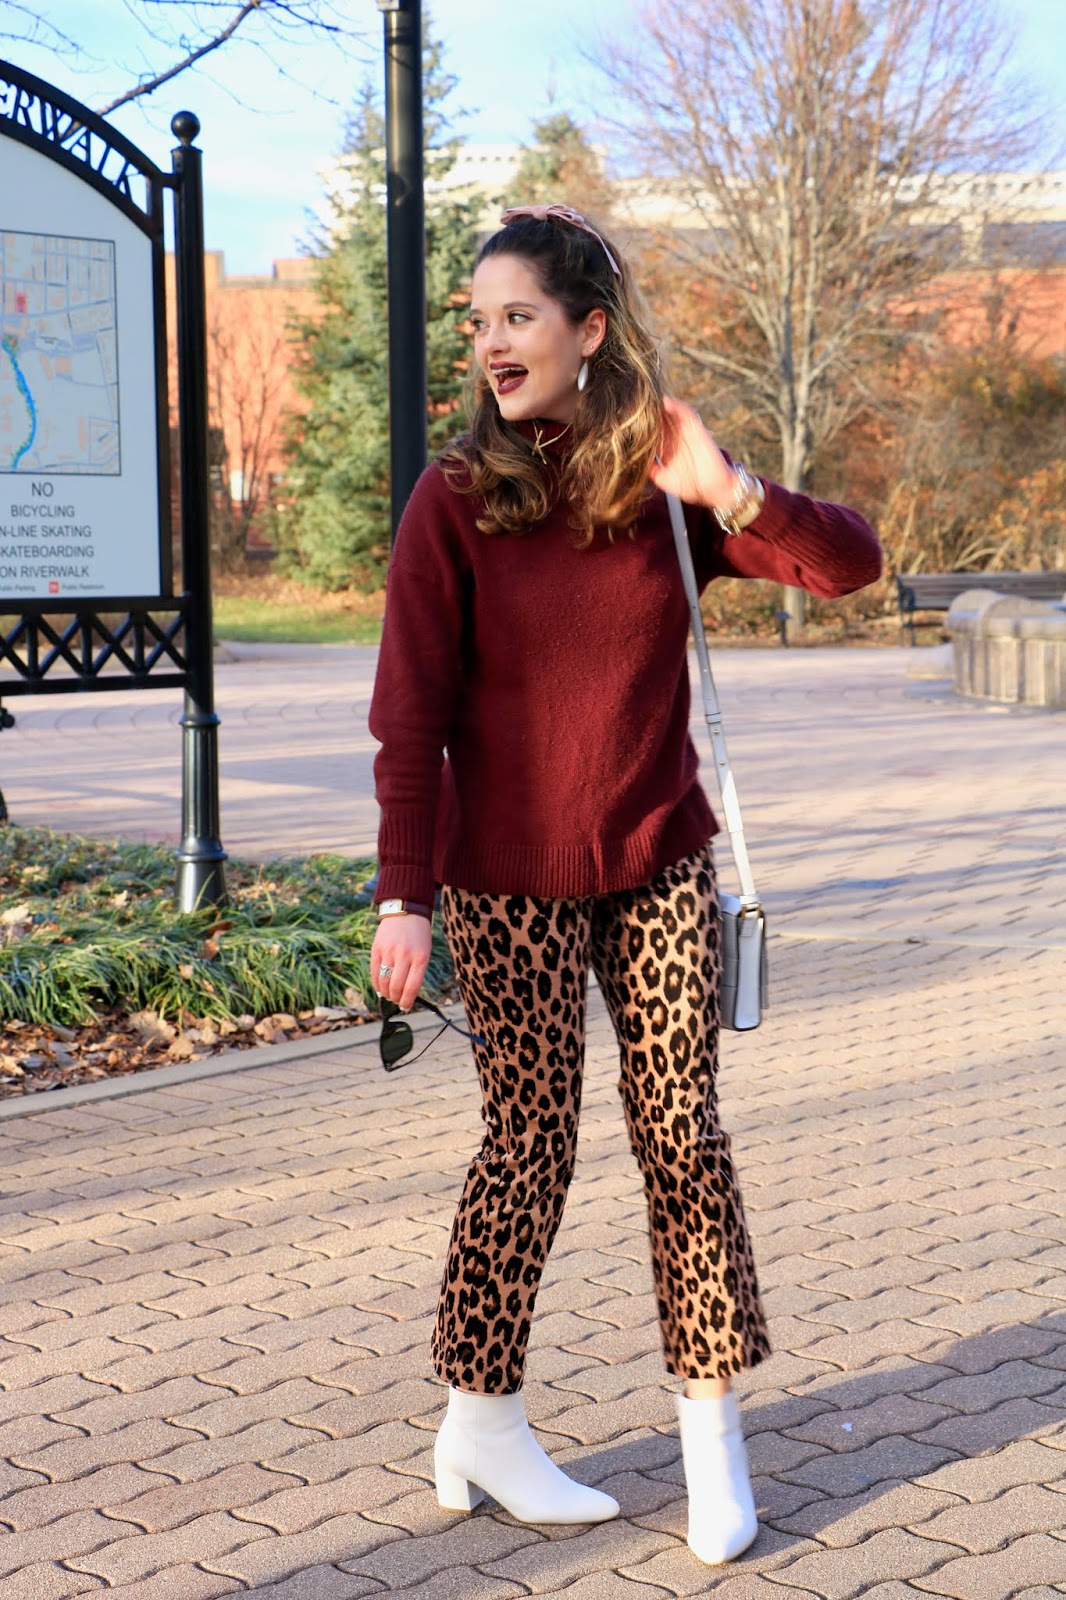 Nyc fashion blogger Kathleen Harper's casual Valentine's Day outfit